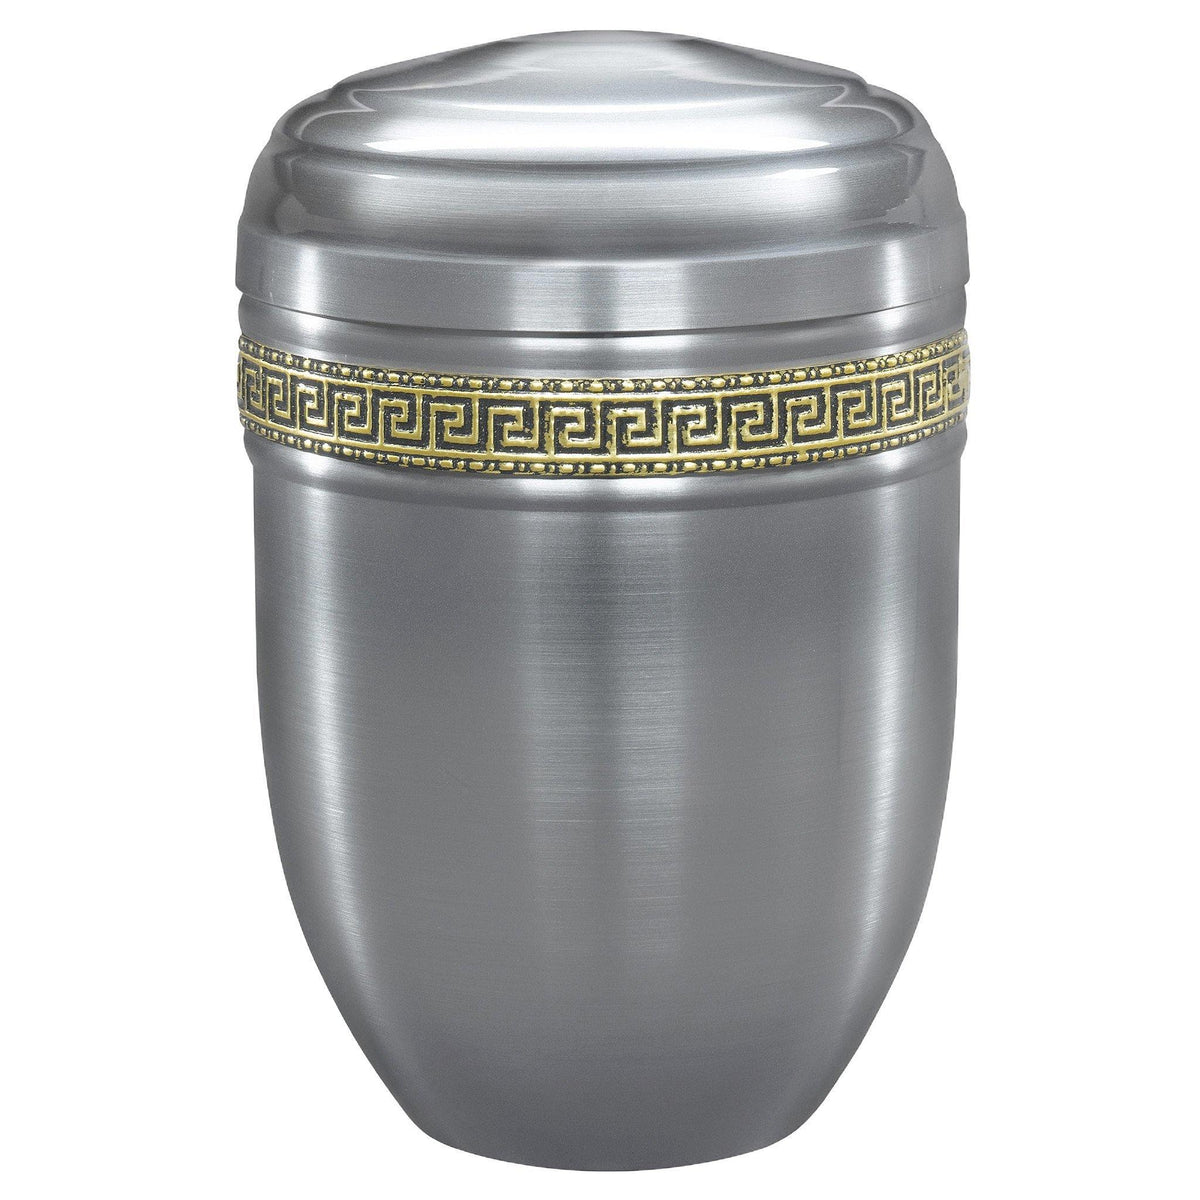 Purley Brushed Steel Band Cremation Ashes Urn PLU